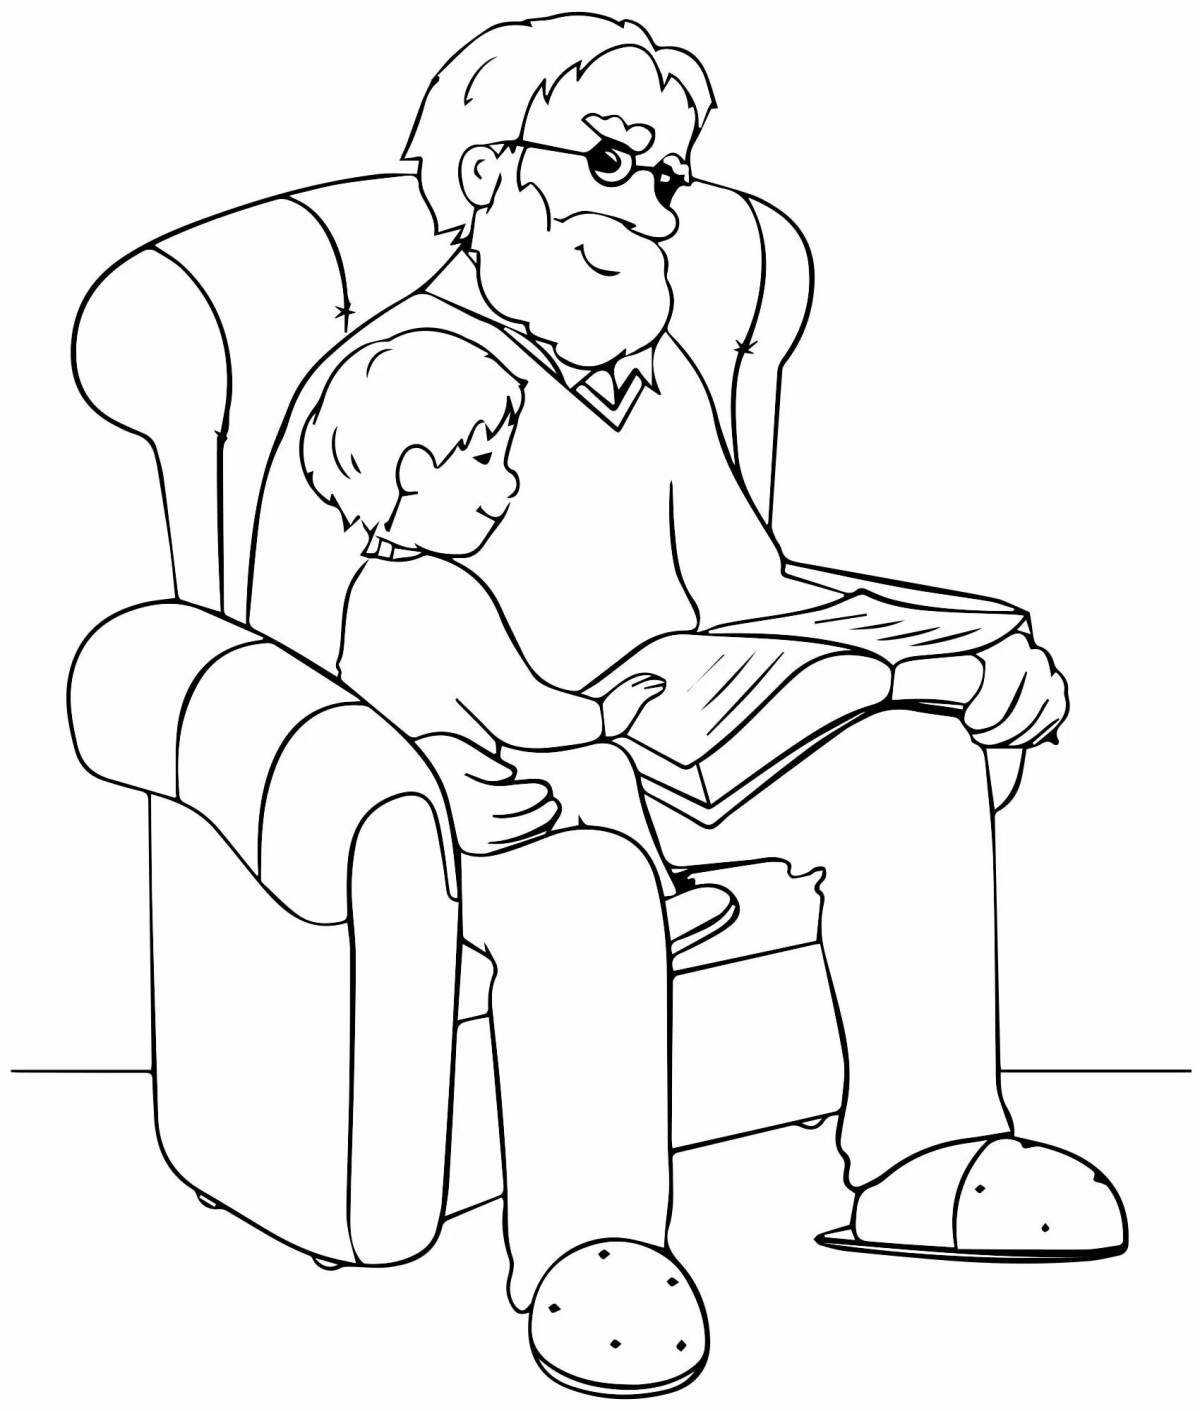 Colouring serene grandfather and granddaughter